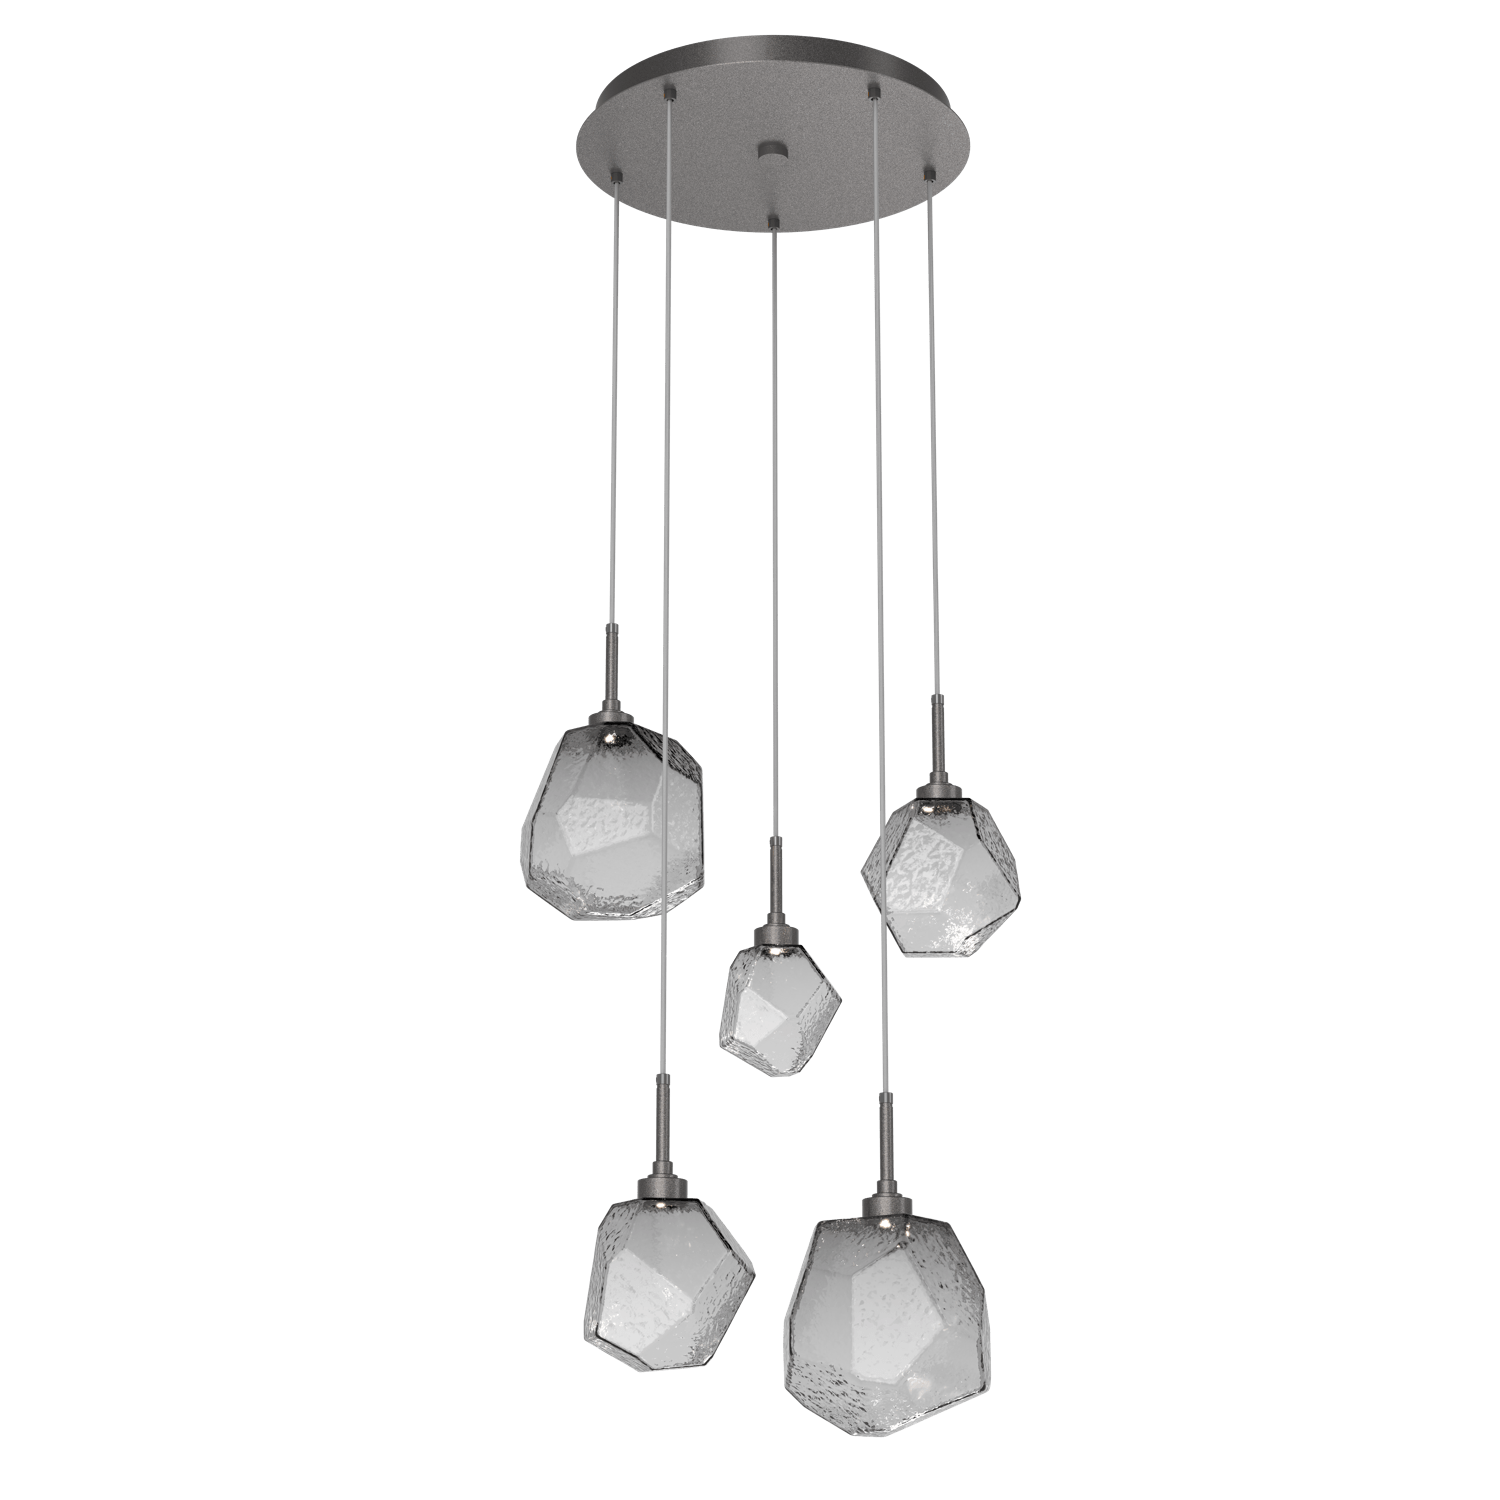 CHB0039-05-GP-S-Hammerton-Studio-Gem-5-light-round-pendant-chandelier-with-graphite-finish-and-smoke-blown-glass-shades-and-LED-lamping